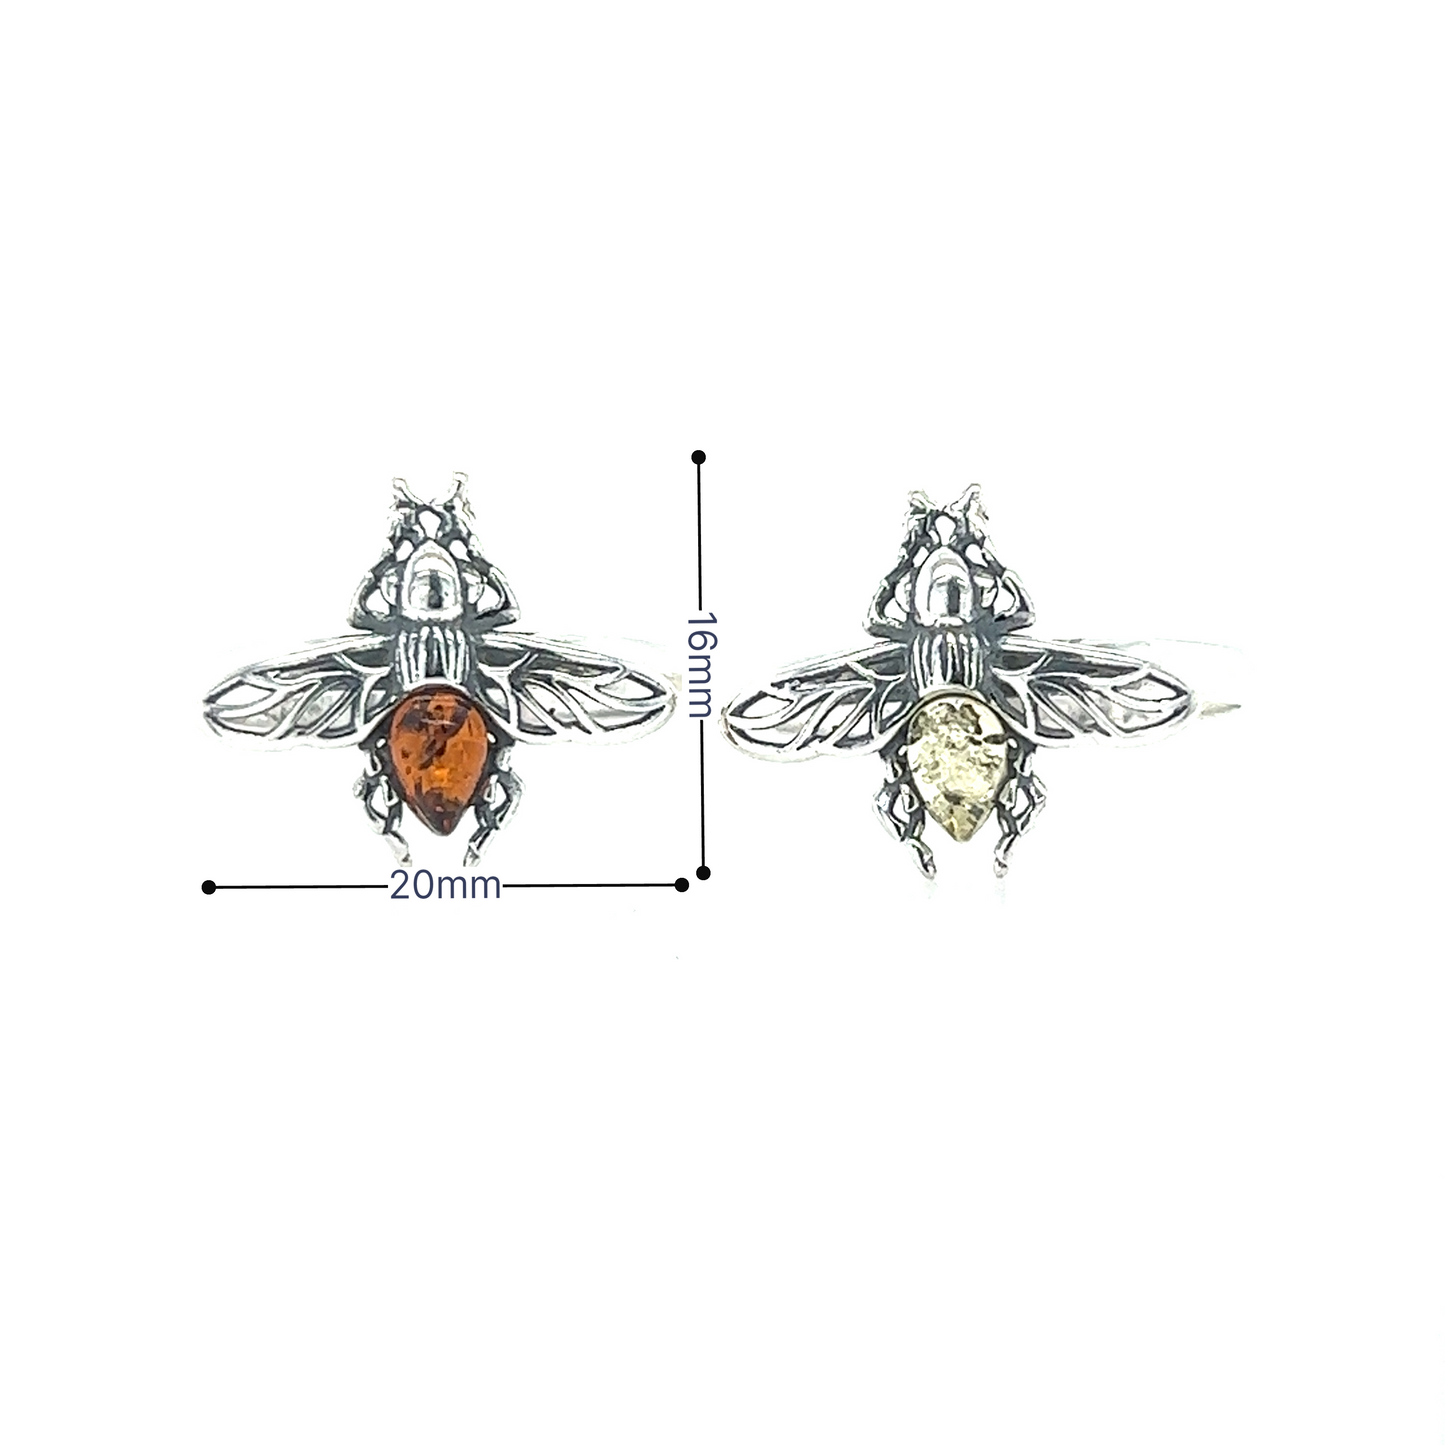 A pair of Super Silver Detailed Baltic Amber Bee Earrings.